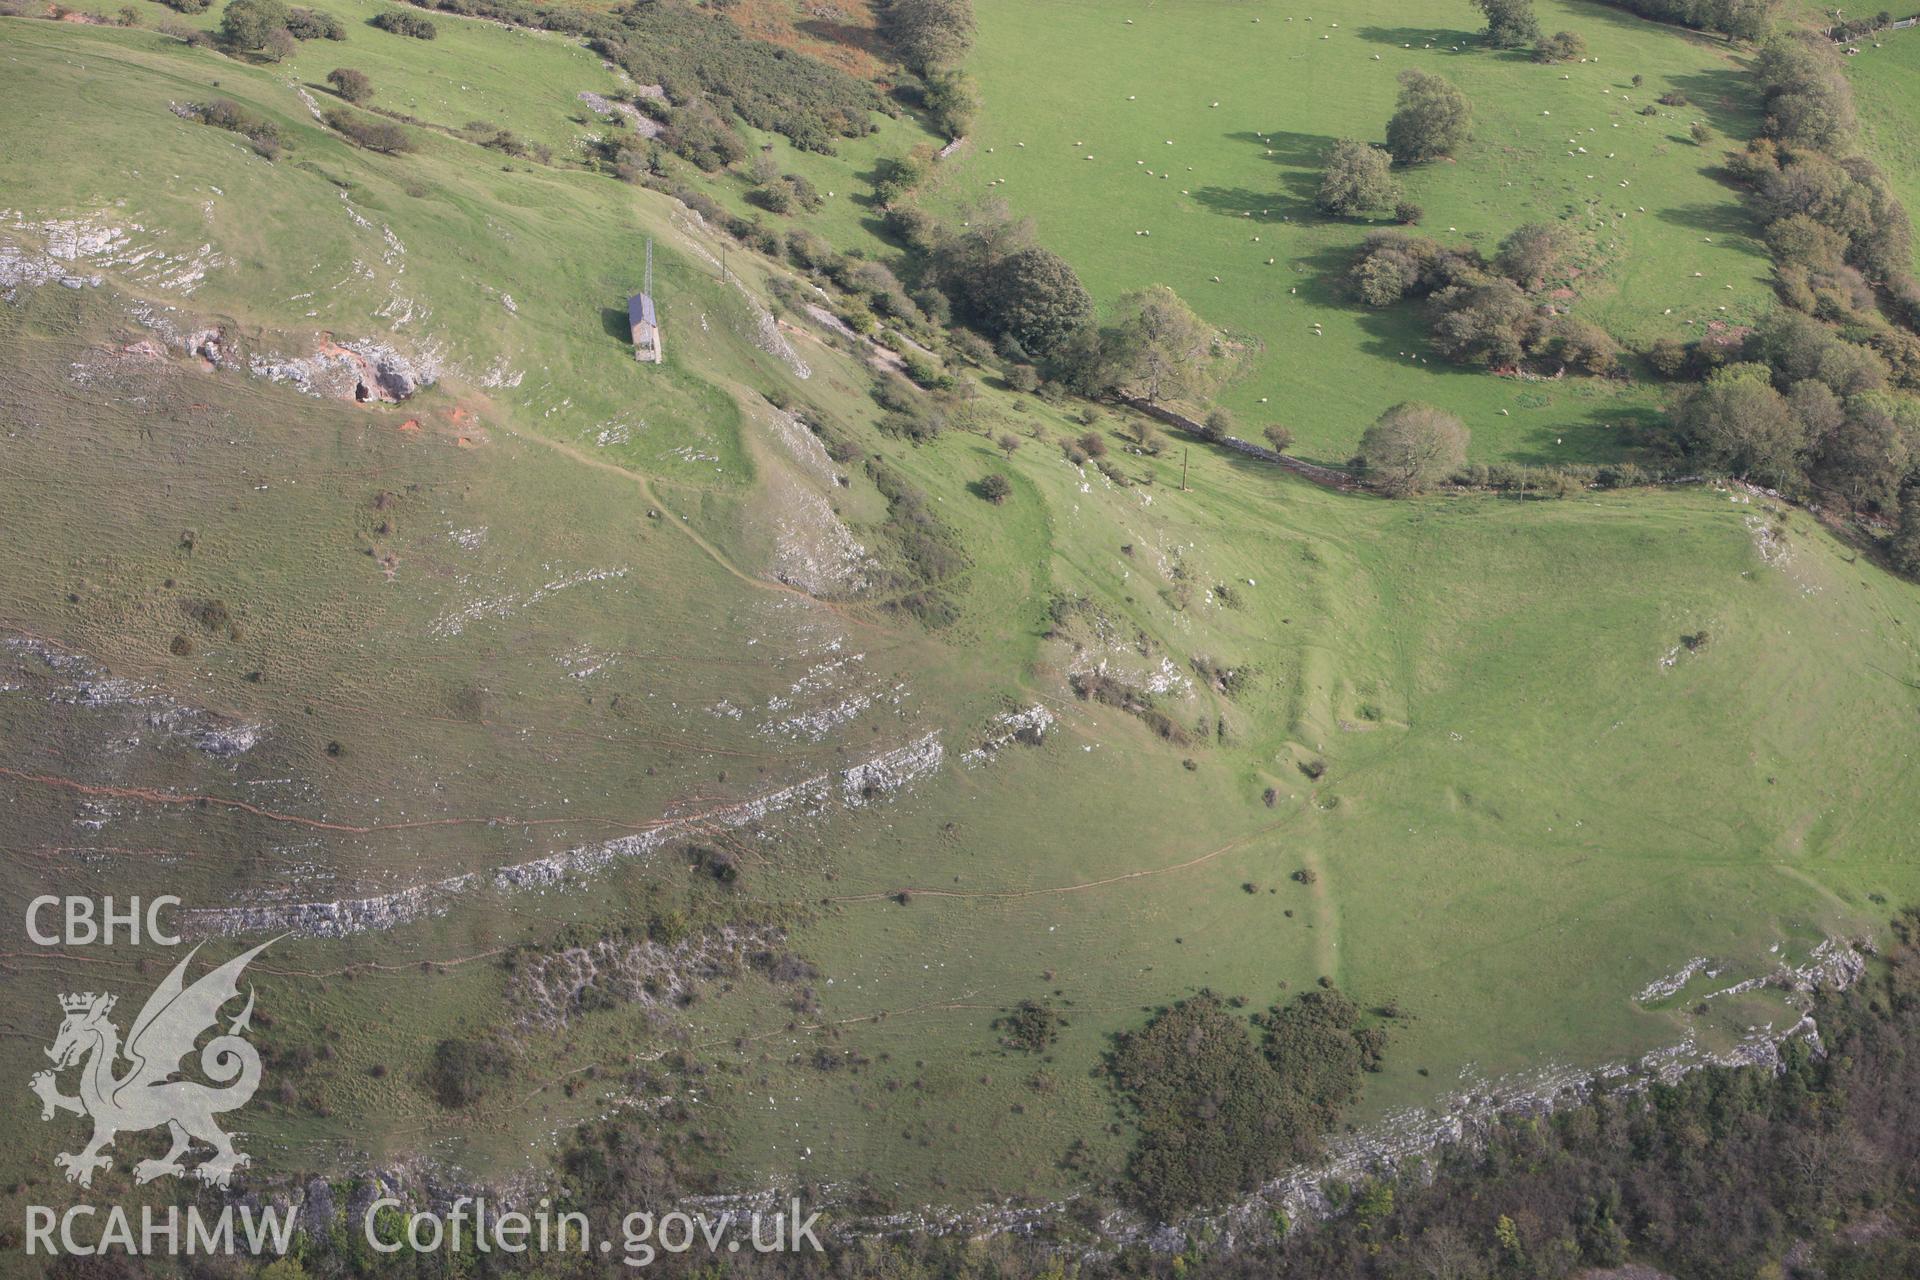 RCAHMW colour oblique photograph of Moel Hiraddug Camp. Taken by Toby Driver on 04/10/2011.